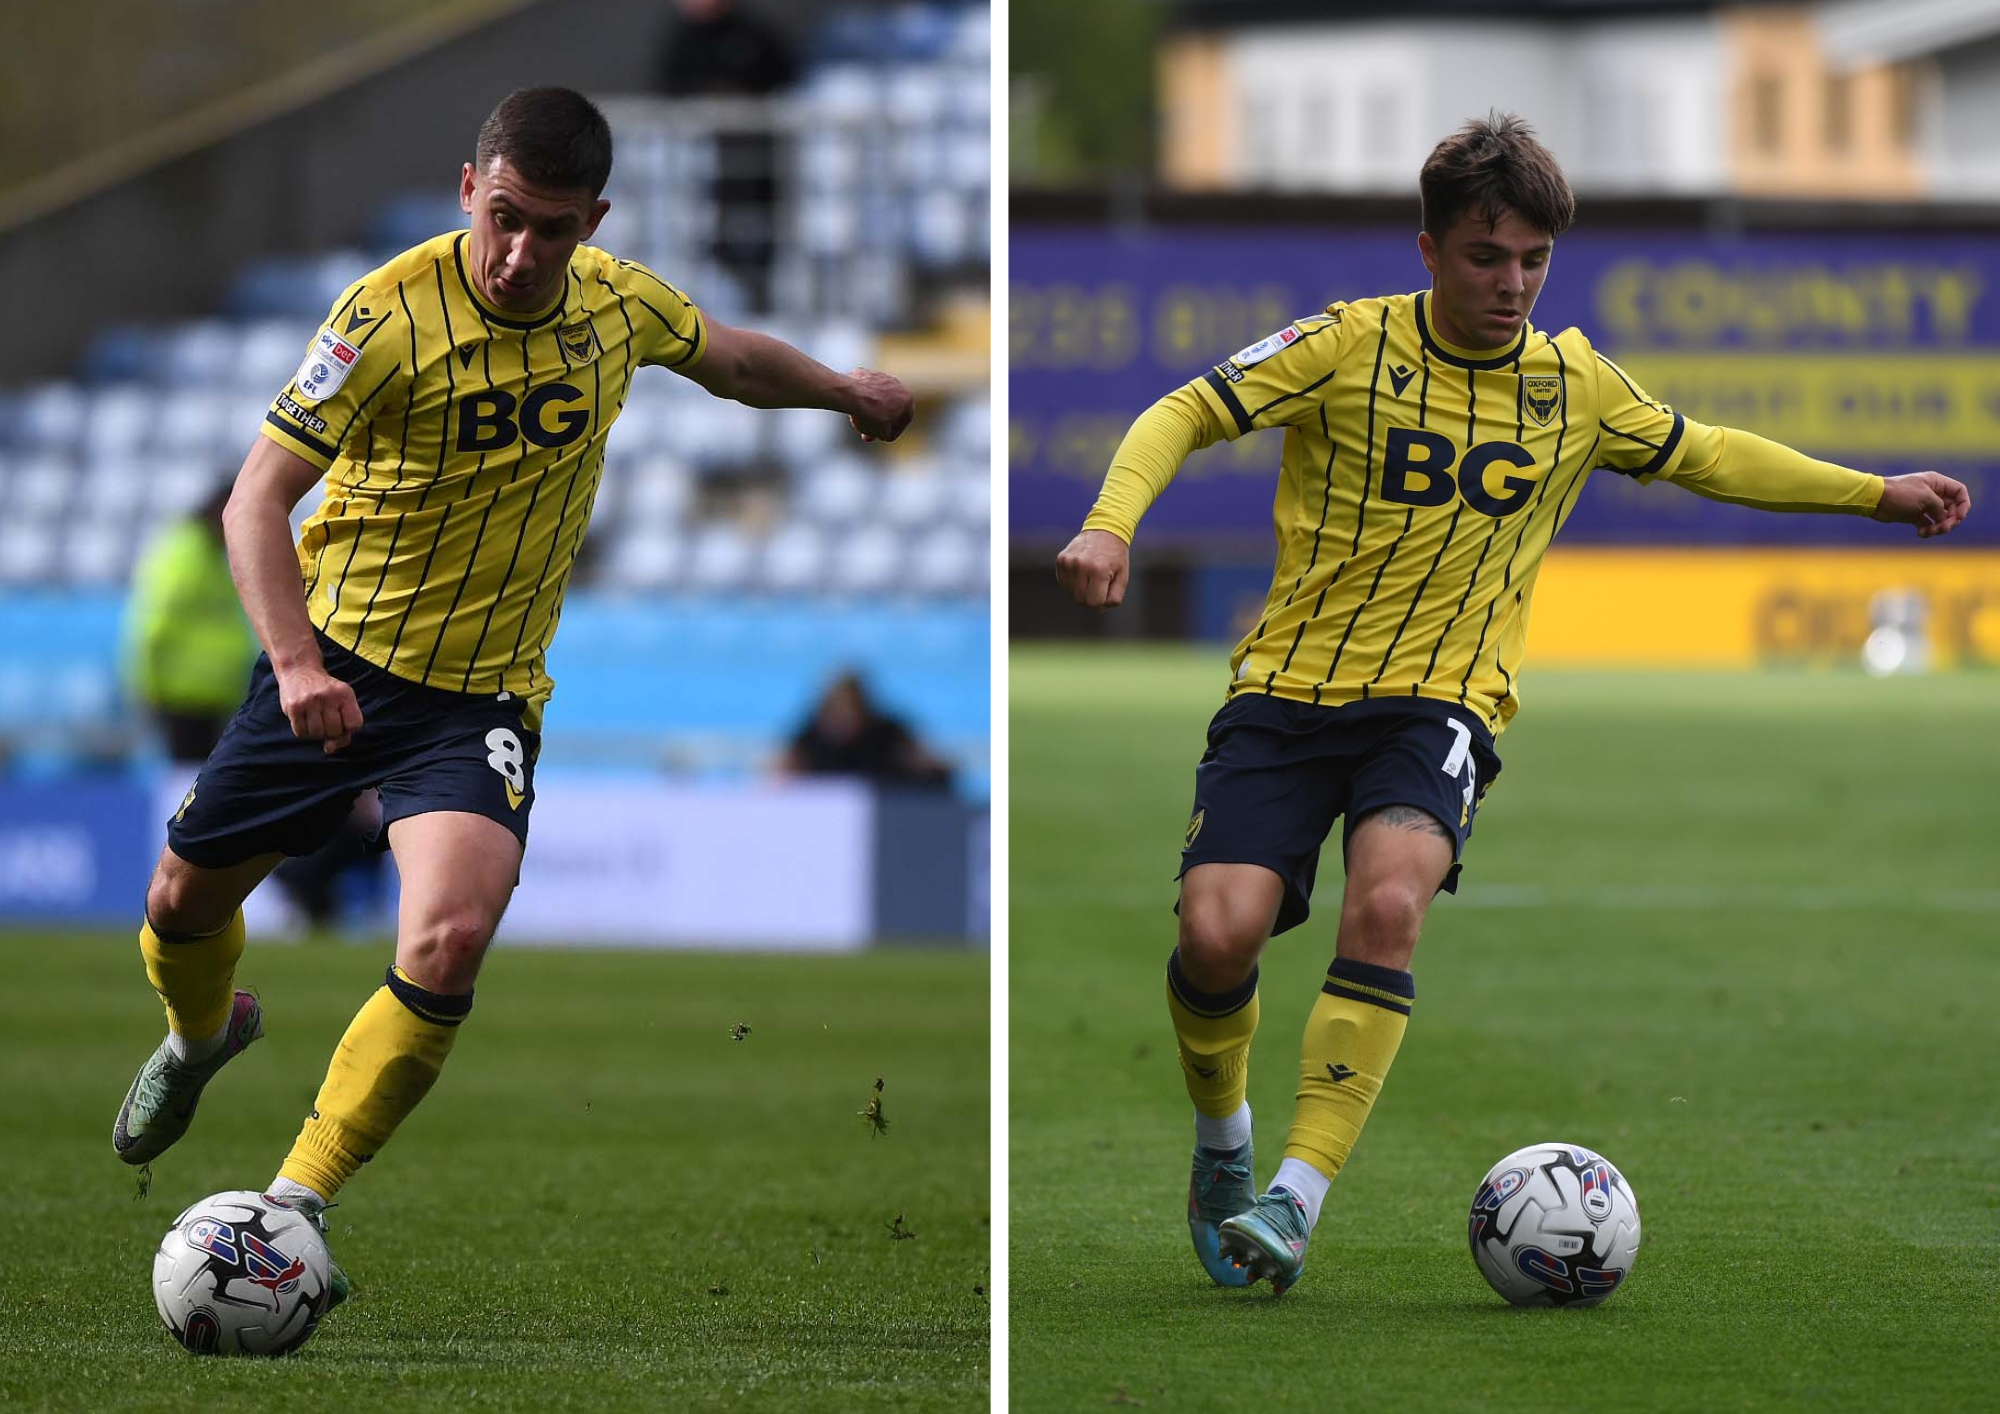 Cameron Brannagan and Tyler Goodrham sign new Oxford United contracts